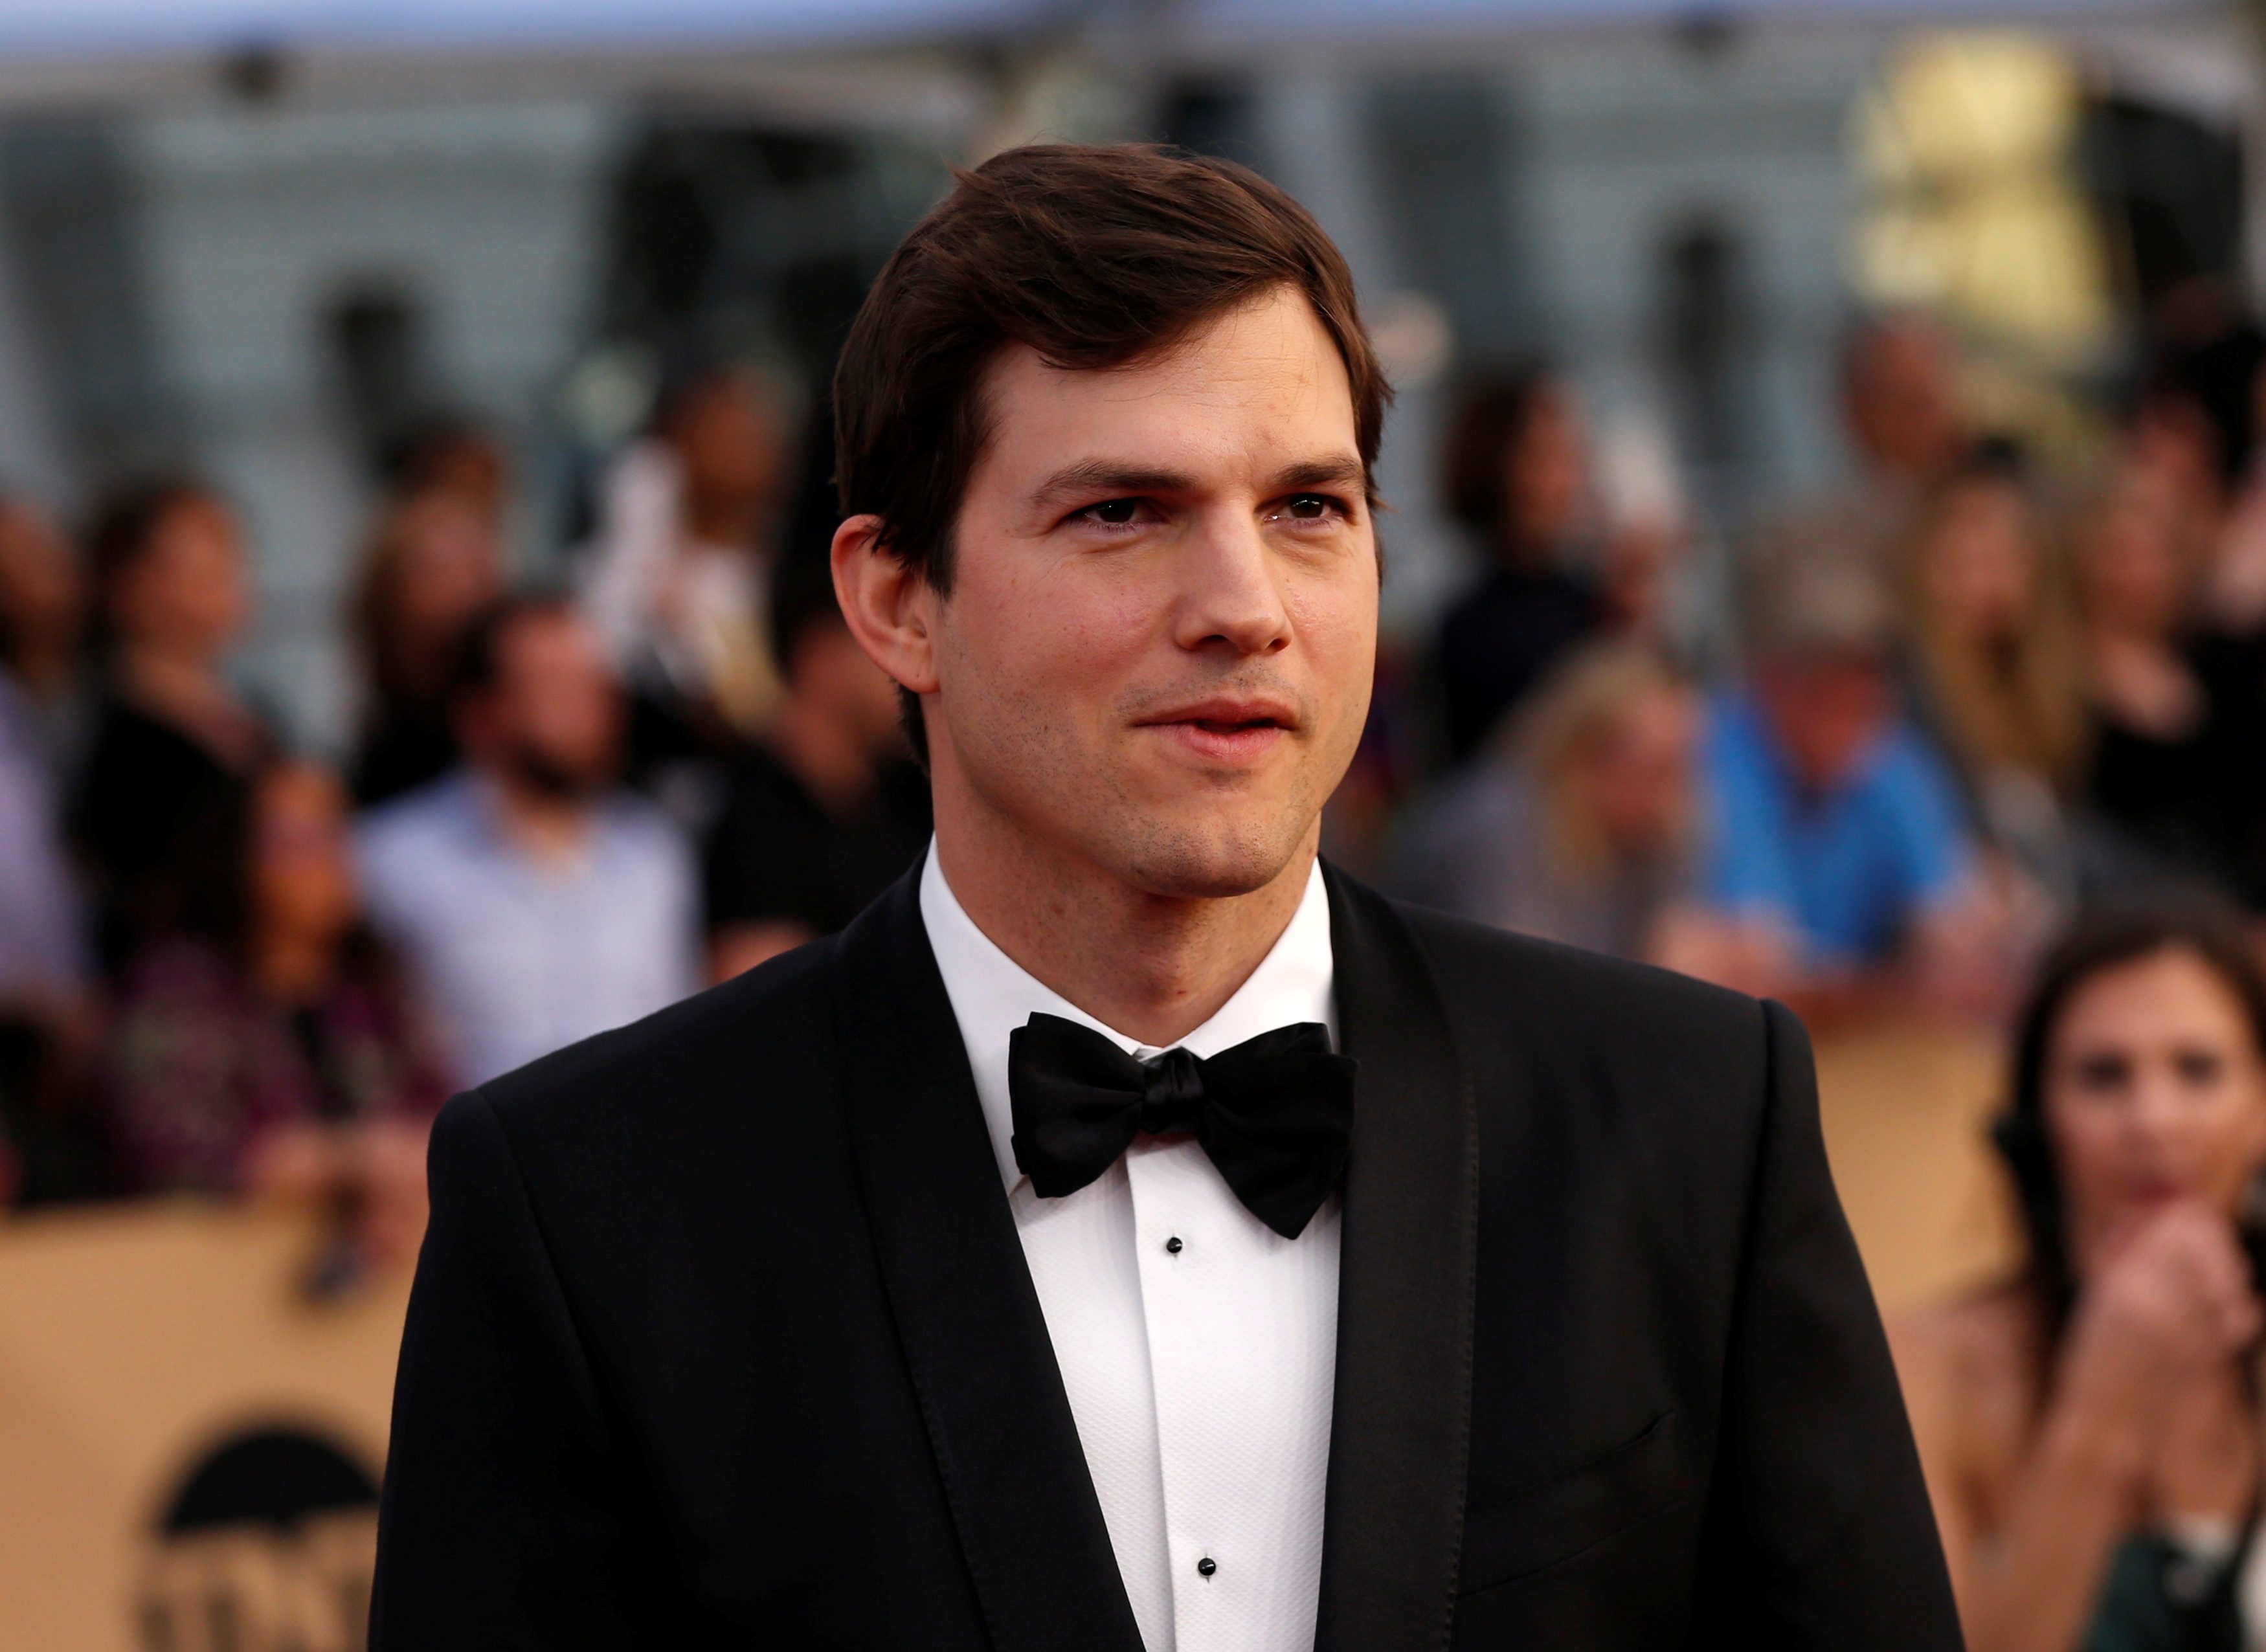 Ashton Kutcher backed out of Virgin Galactic space flight